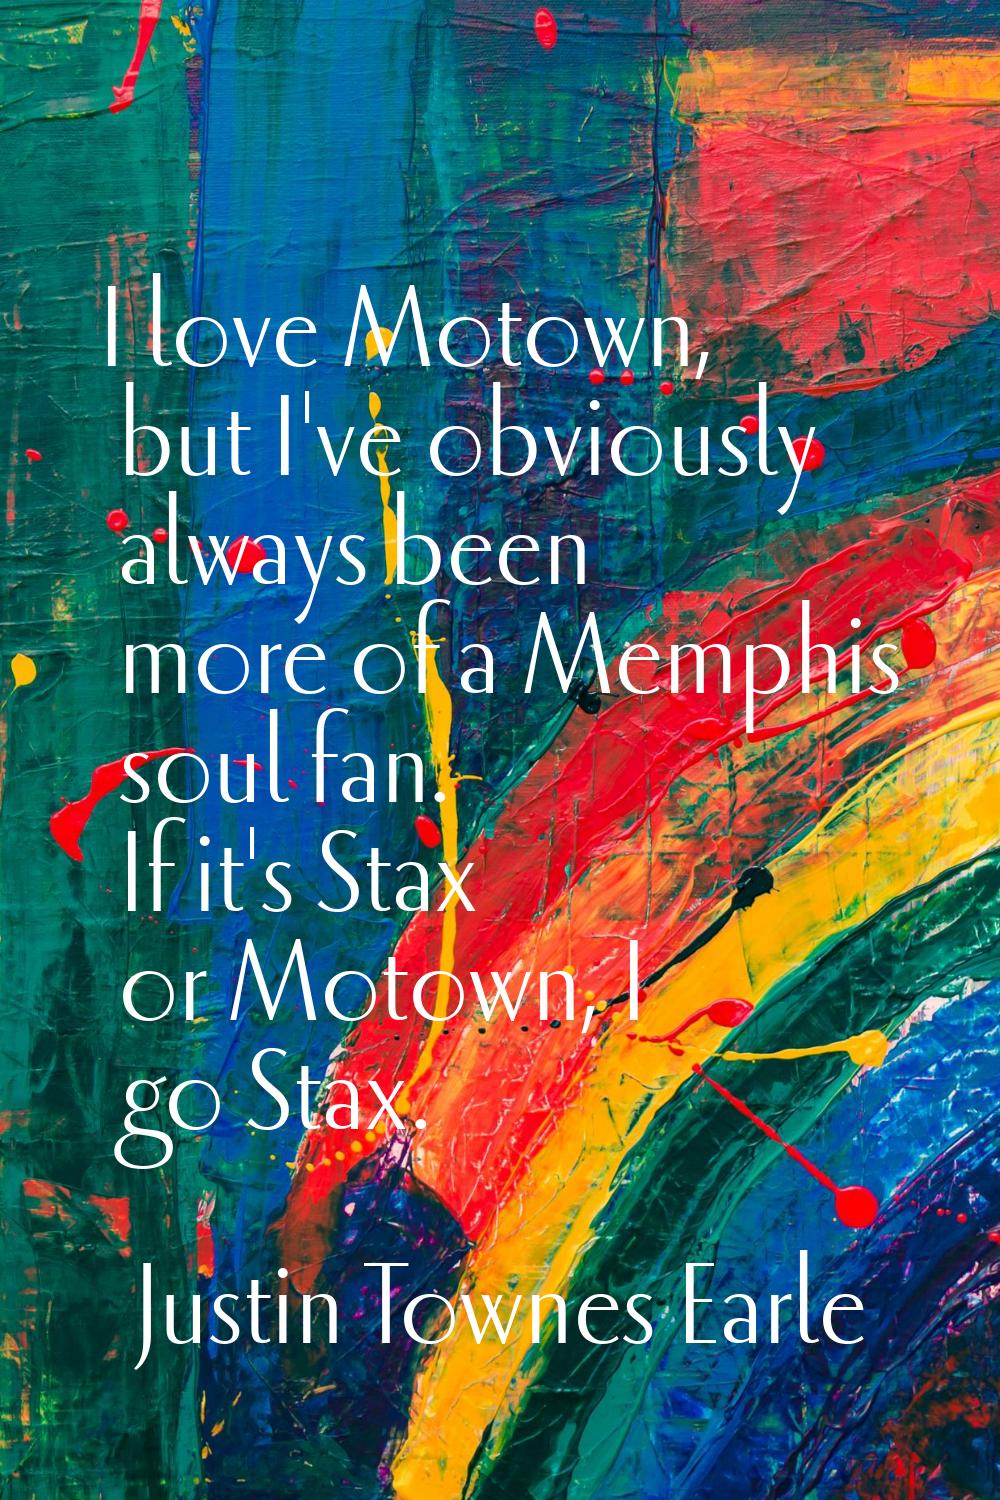 I love Motown, but I've obviously always been more of a Memphis soul fan. If it's Stax or Motown, I